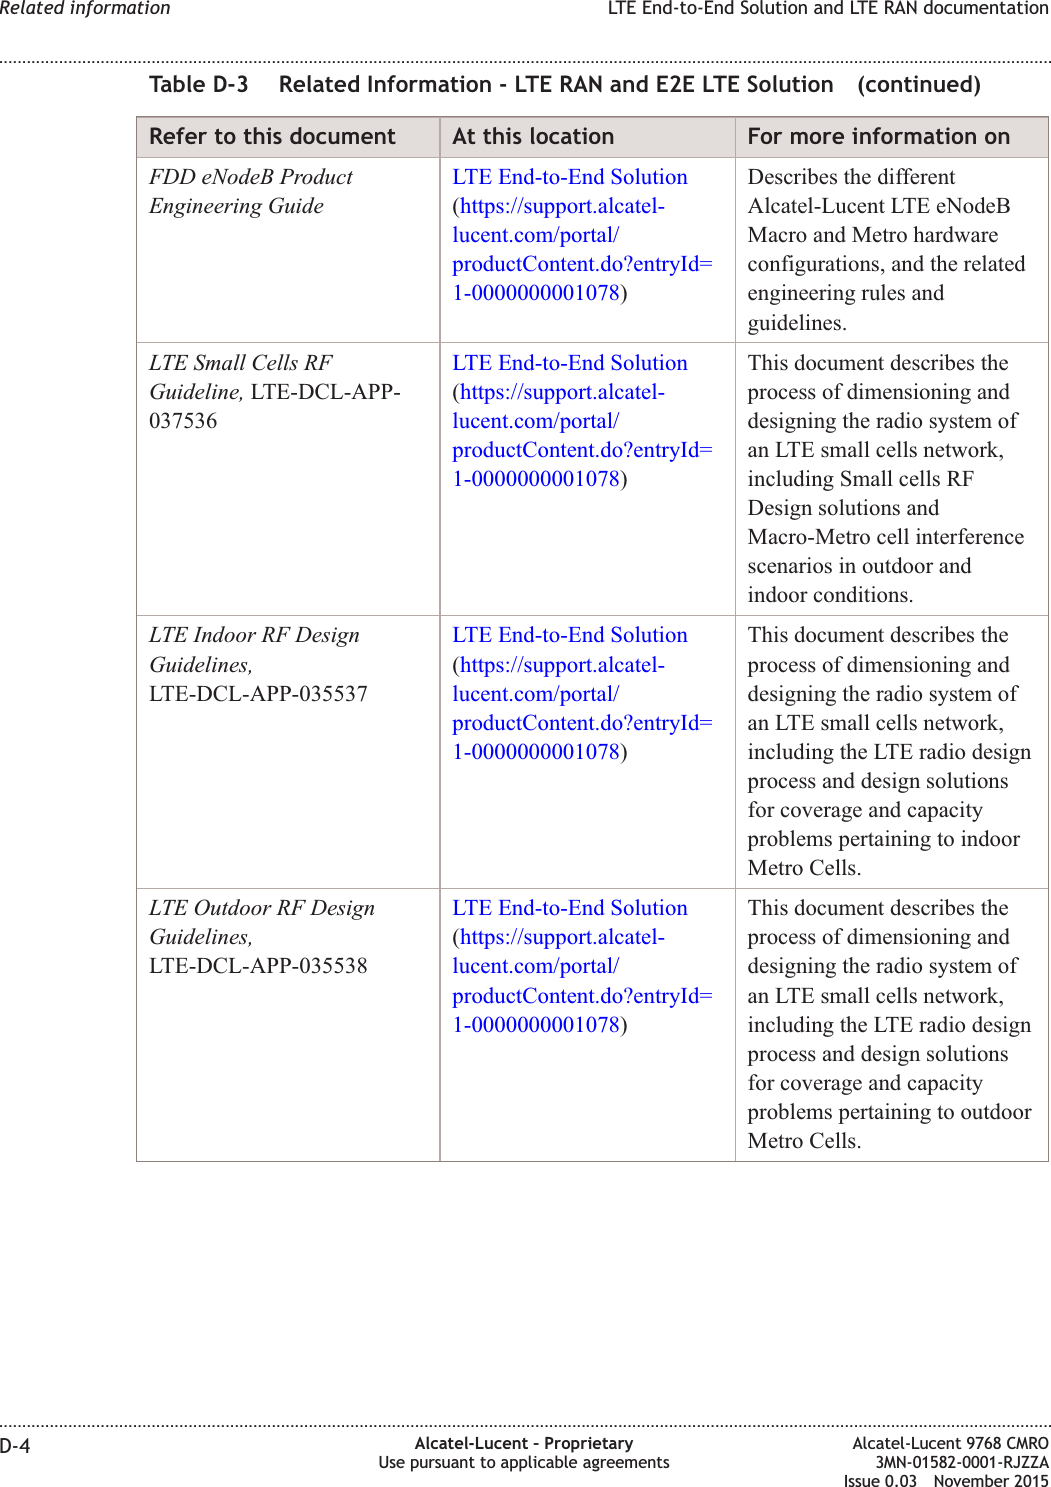 Table D-3 Related Information - LTE RAN and E2E LTE Solution (continued)Refer to this document At this location For more information onFDD eNodeB ProductEngineering GuideLTE End-to-End Solution(https://support.alcatel-lucent.com/portal/productContent.do?entryId=1-0000000001078)Describes the differentAlcatel-Lucent LTE eNodeBMacro and Metro hardwareconfigurations, and the relatedengineering rules andguidelines.LTE Small Cells RFGuideline, LTE-DCL-APP-037536LTE End-to-End Solution(https://support.alcatel-lucent.com/portal/productContent.do?entryId=1-0000000001078)This document describes theprocess of dimensioning anddesigning the radio system ofan LTE small cells network,including Small cells RFDesign solutions andMacro-Metro cell interferencescenarios in outdoor andindoor conditions.LTE Indoor RF DesignGuidelines,LTE-DCL-APP-035537LTE End-to-End Solution(https://support.alcatel-lucent.com/portal/productContent.do?entryId=1-0000000001078)This document describes theprocess of dimensioning anddesigning the radio system ofan LTE small cells network,including the LTE radio designprocess and design solutionsfor coverage and capacityproblems pertaining to indoorMetro Cells.LTE Outdoor RF DesignGuidelines,LTE-DCL-APP-035538LTE End-to-End Solution(https://support.alcatel-lucent.com/portal/productContent.do?entryId=1-0000000001078)This document describes theprocess of dimensioning anddesigning the radio system ofan LTE small cells network,including the LTE radio designprocess and design solutionsfor coverage and capacityproblems pertaining to outdoorMetro Cells.Related information LTE End-to-End Solution and LTE RAN documentation........................................................................................................................................................................................................................................................................................................................................................................................................................................................................D-4 Alcatel-Lucent – ProprietaryUse pursuant to applicable agreementsAlcatel-Lucent 9768 CMRO3MN-01582-0001-RJZZAIssue 0.03 November 2015DRAFTDRAFT